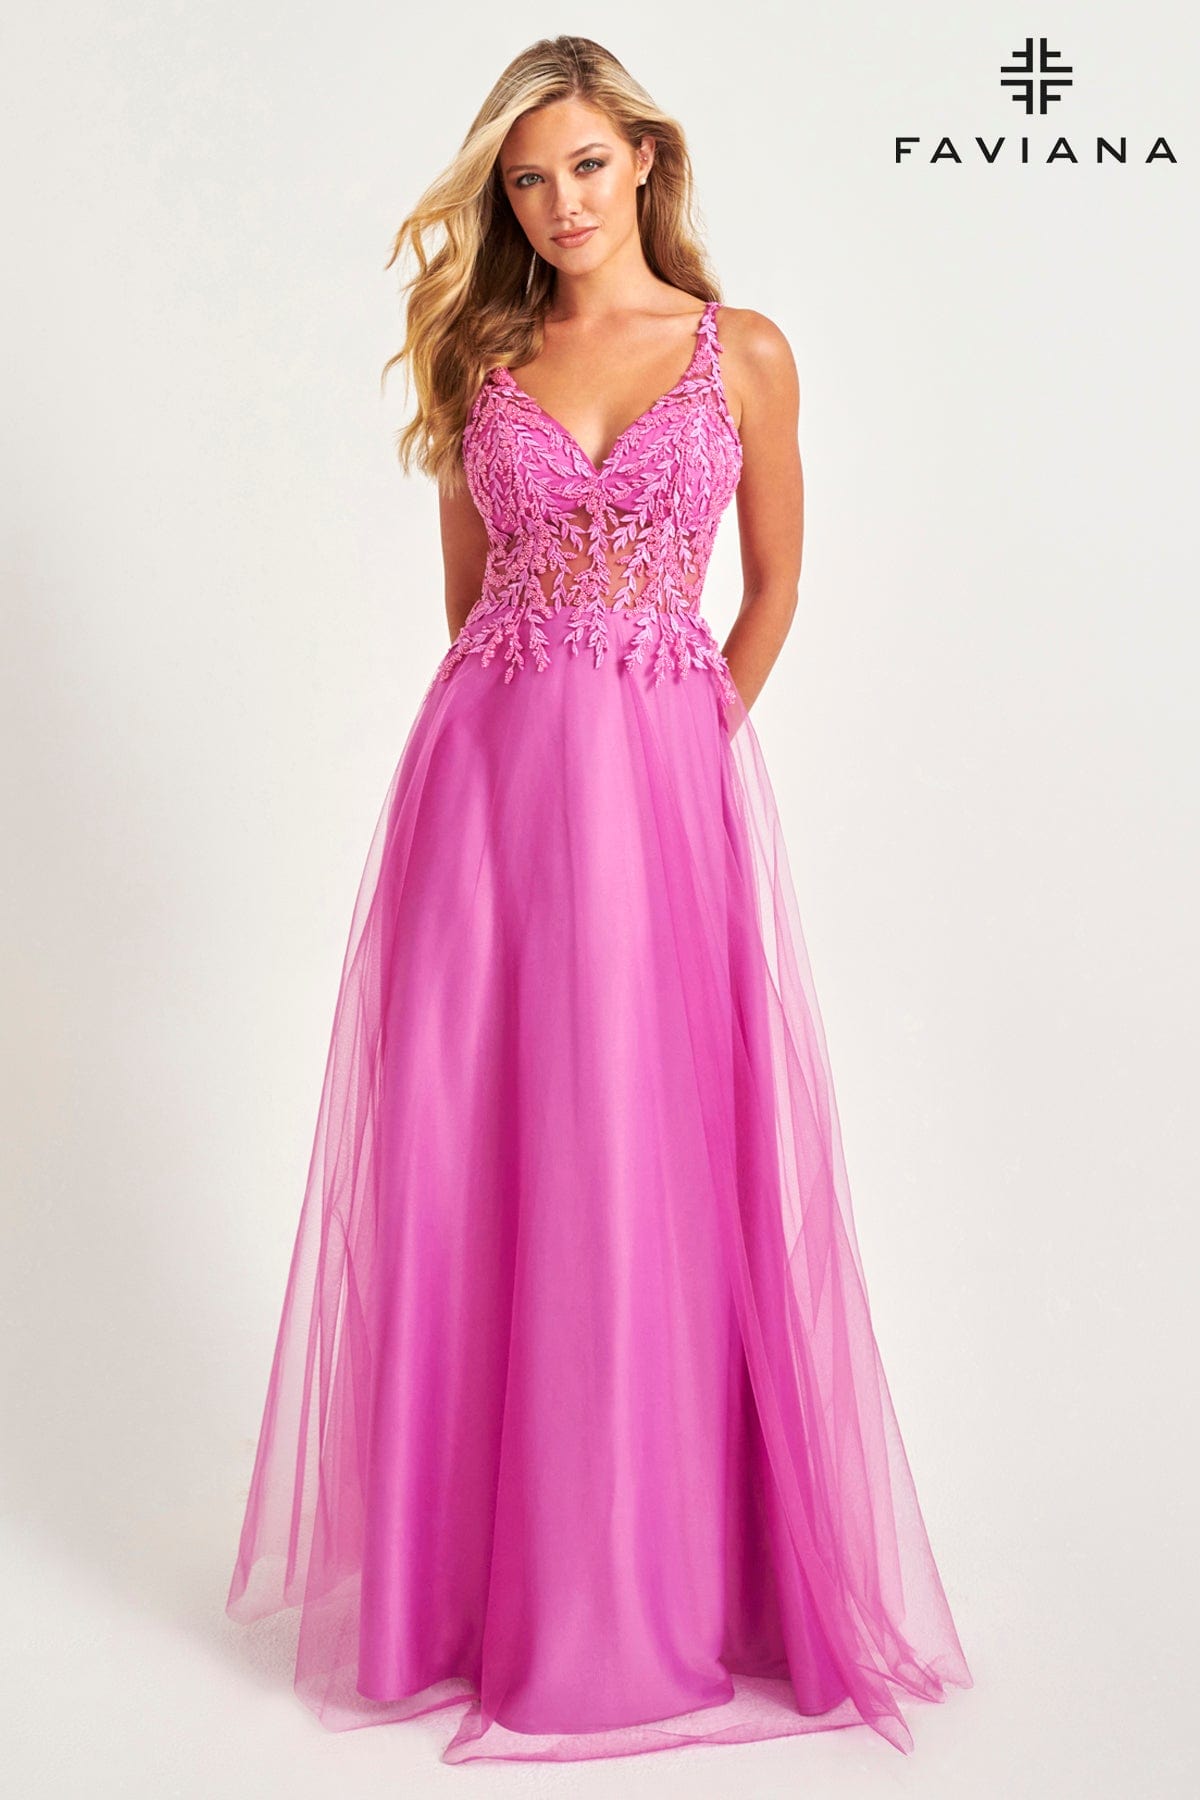 Flowy Tulle Dress With Lace Applique Bustier in Extended Sizing | 11055E